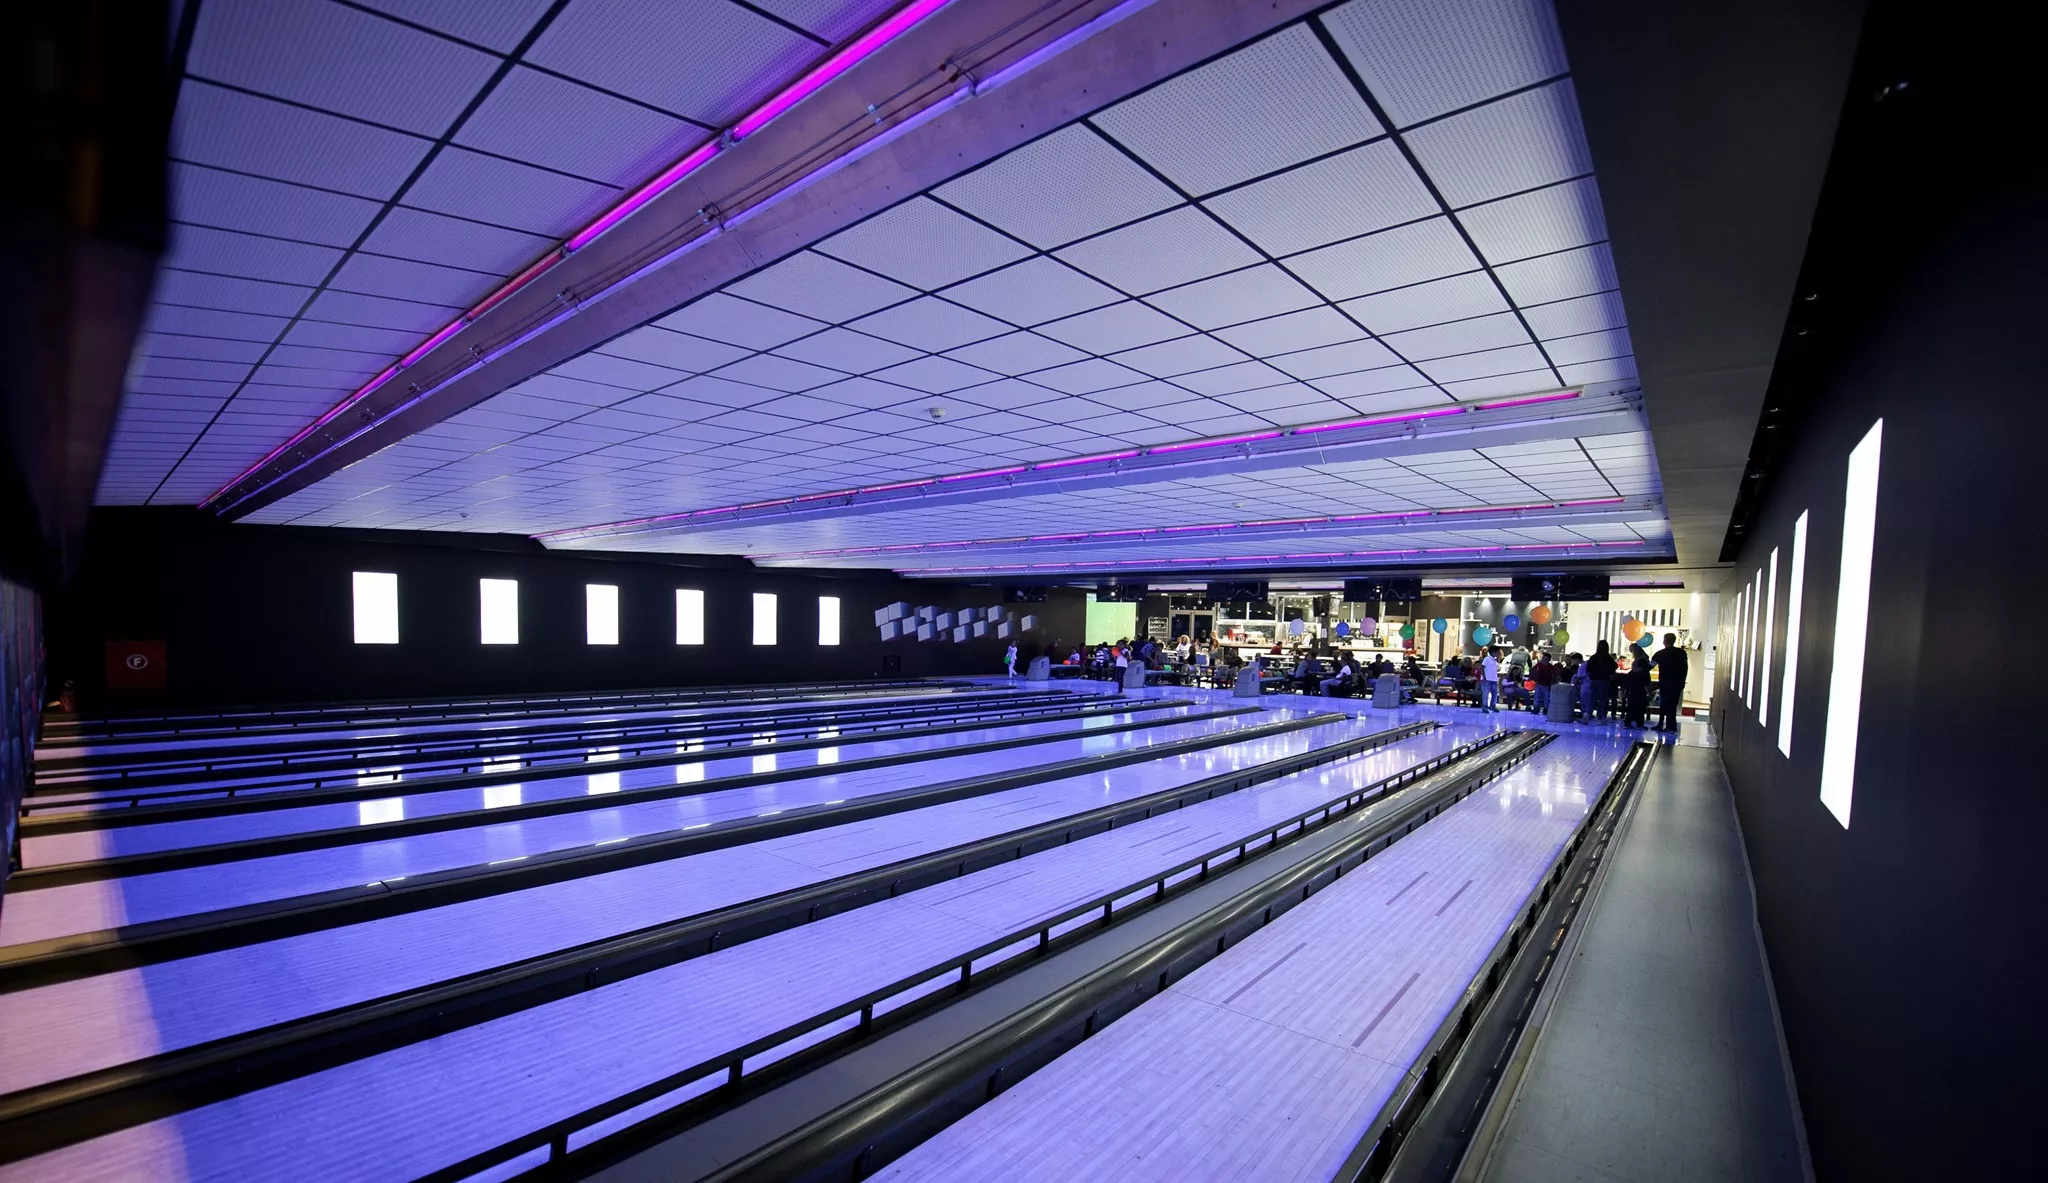 Royal Bowling in Greece, Europe | Bowling - Rated 4.8